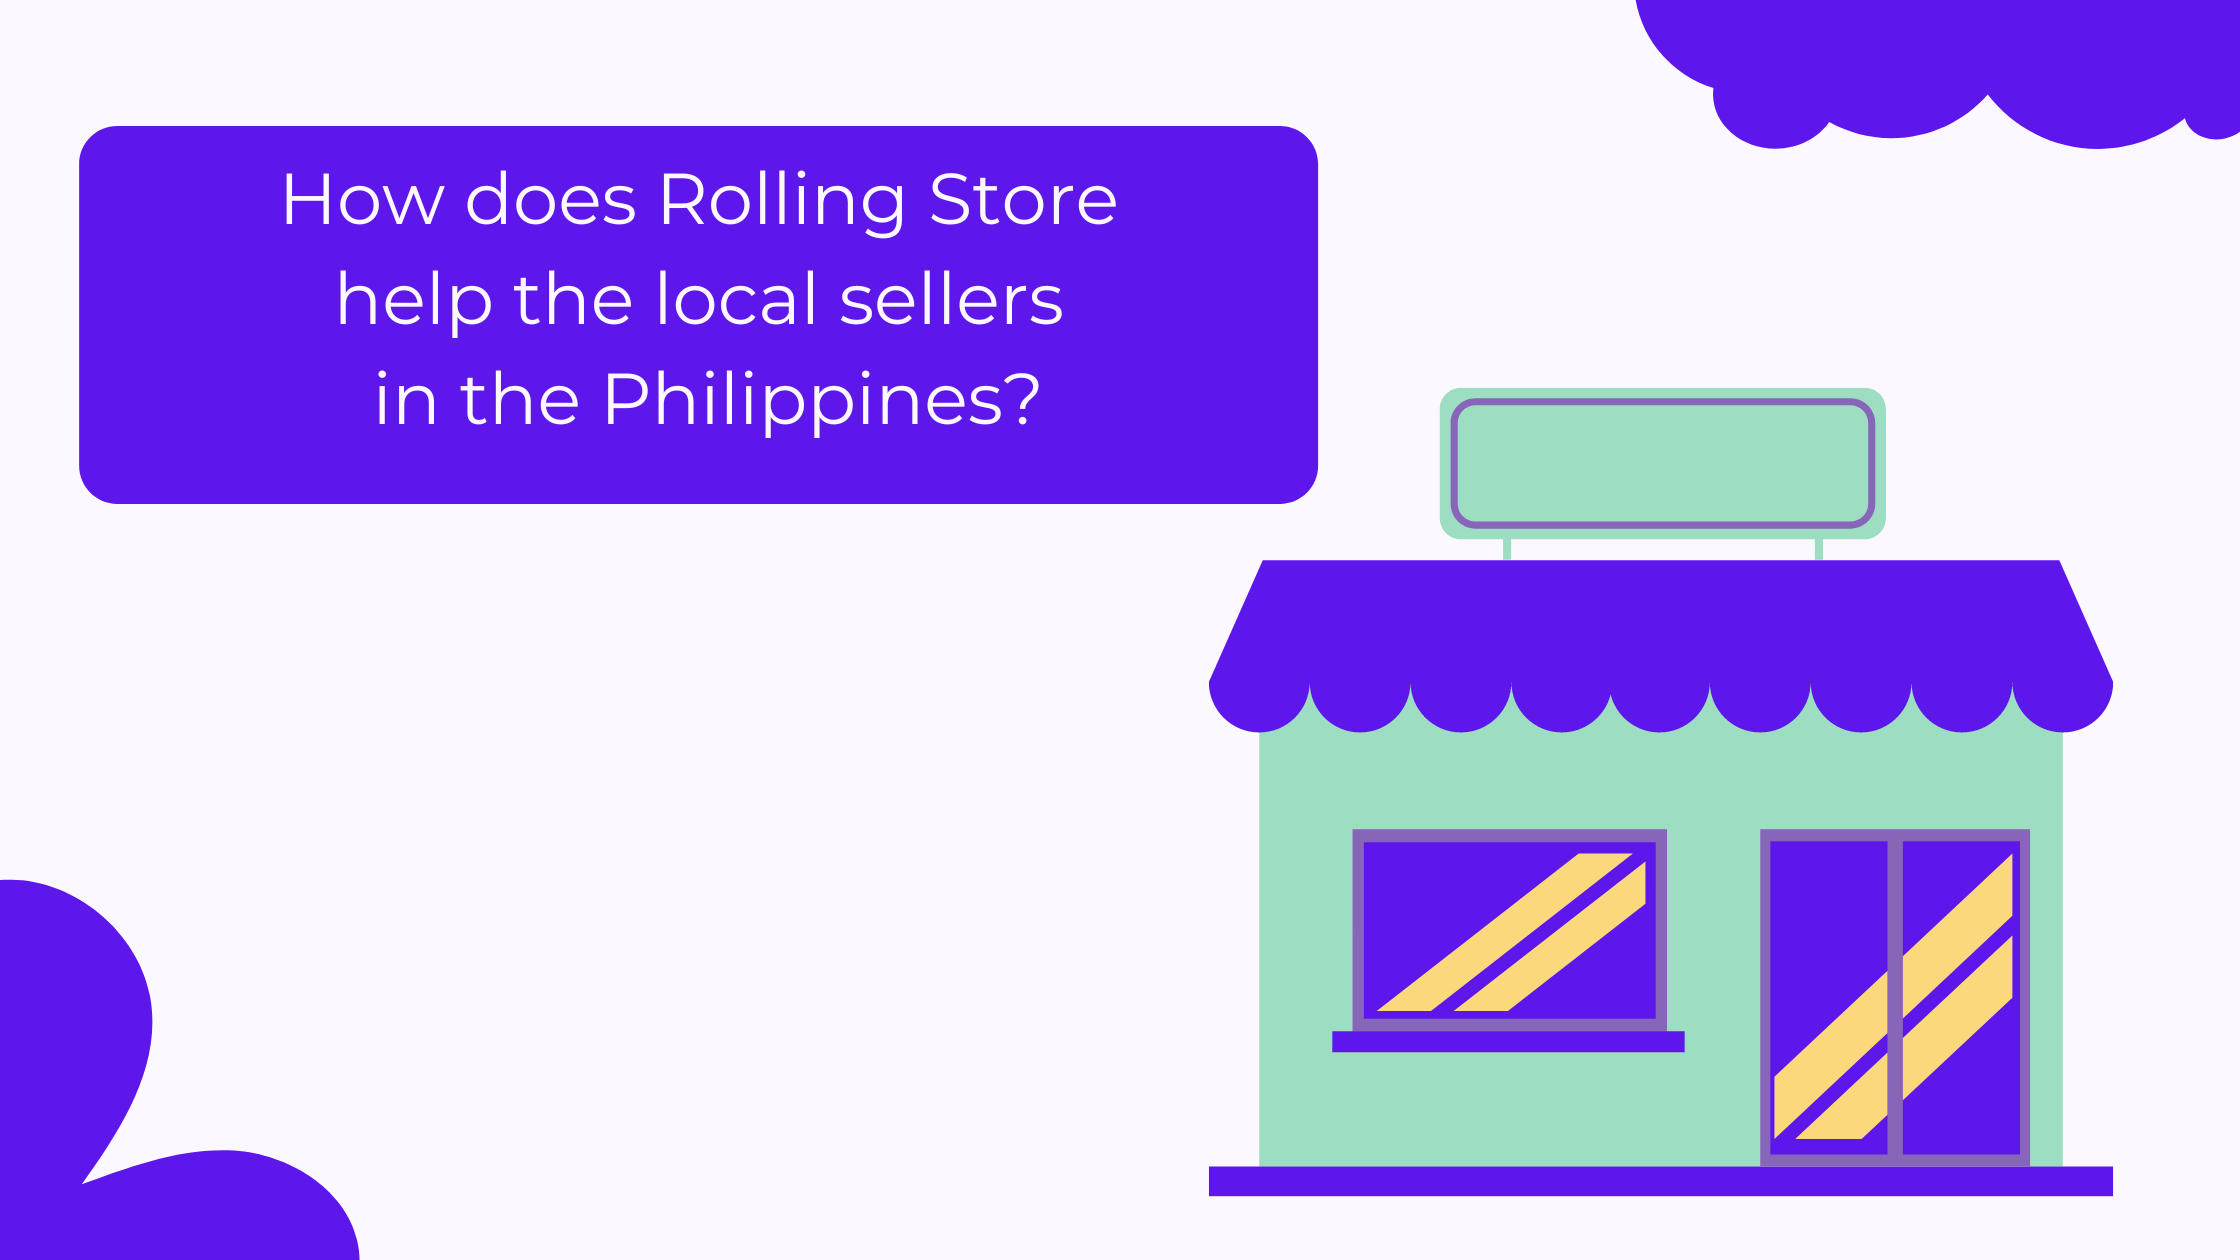 How does Rolling Store help the local sellers in the Philippines